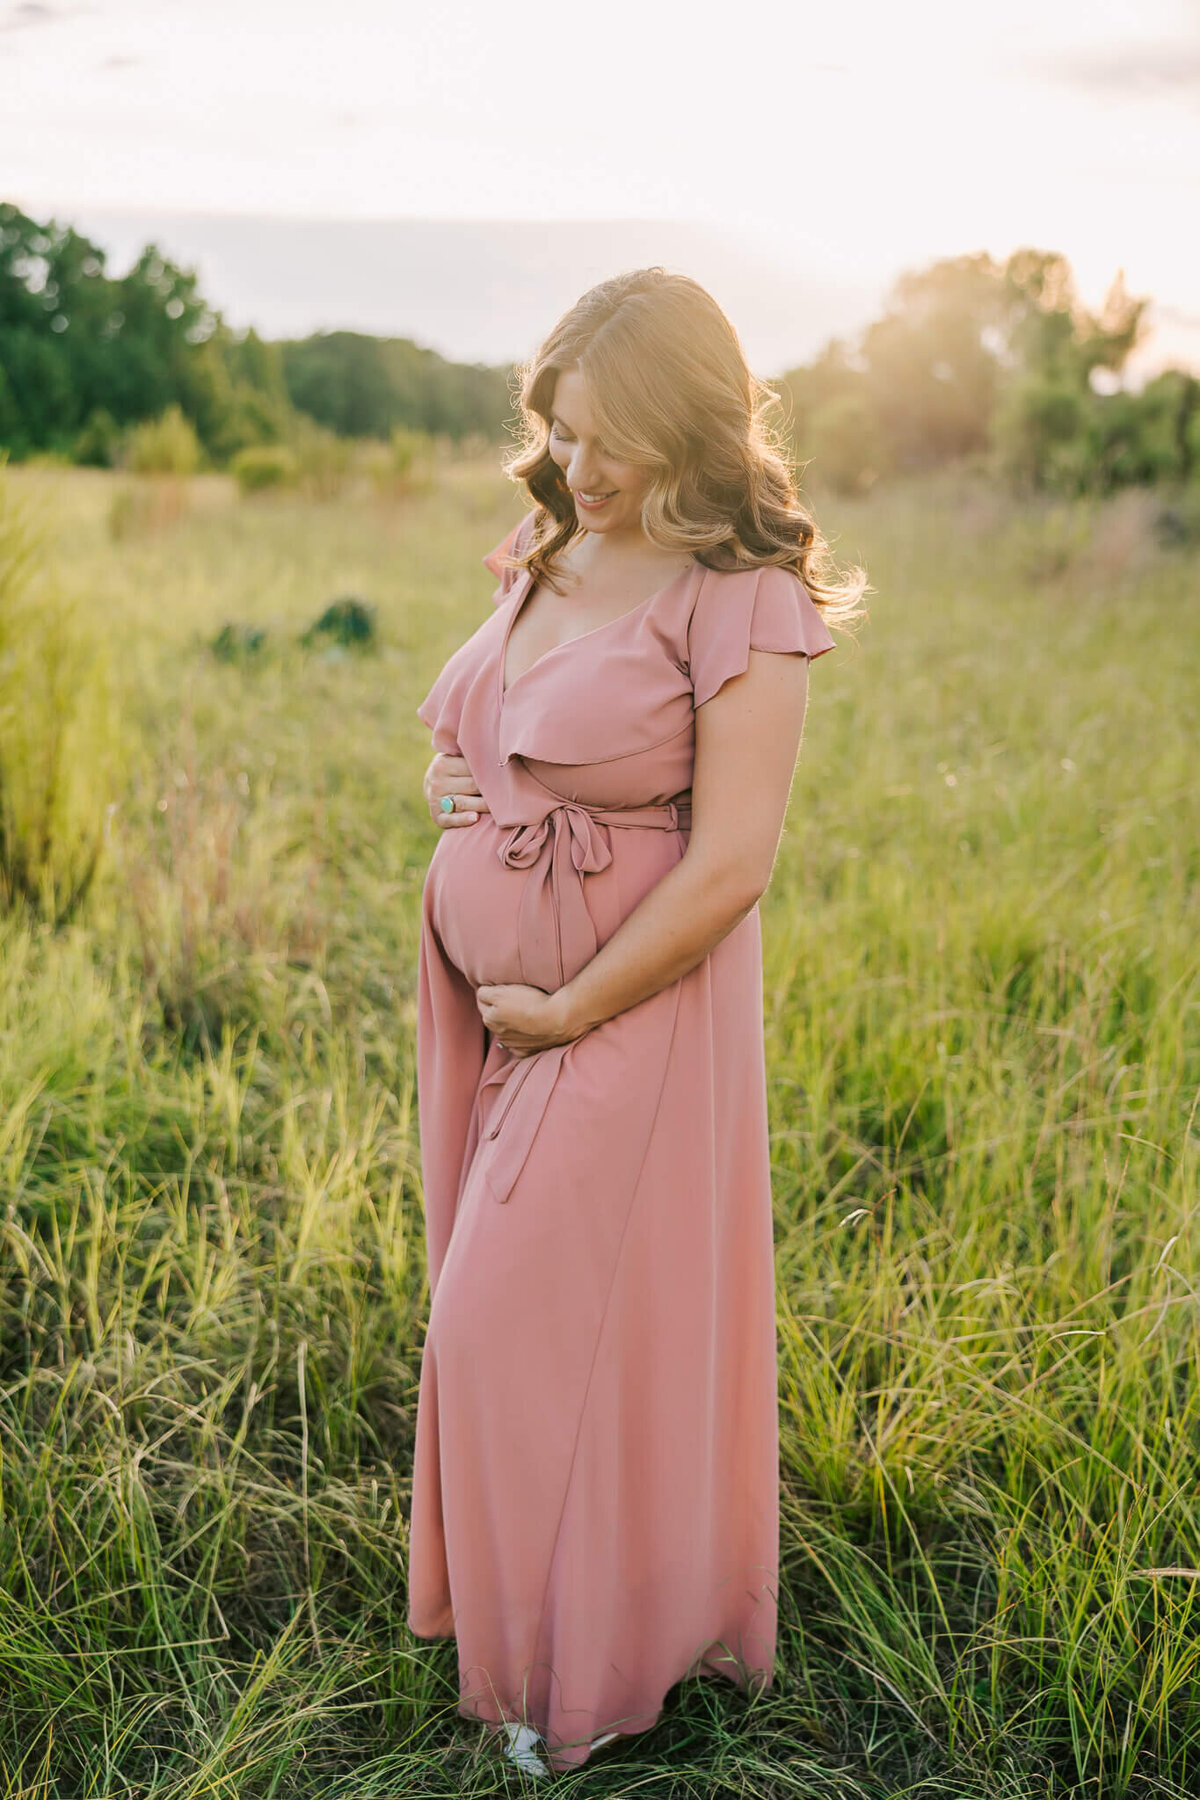 Mom wearing a blush gown smiling during her augusta ga maternity photography session